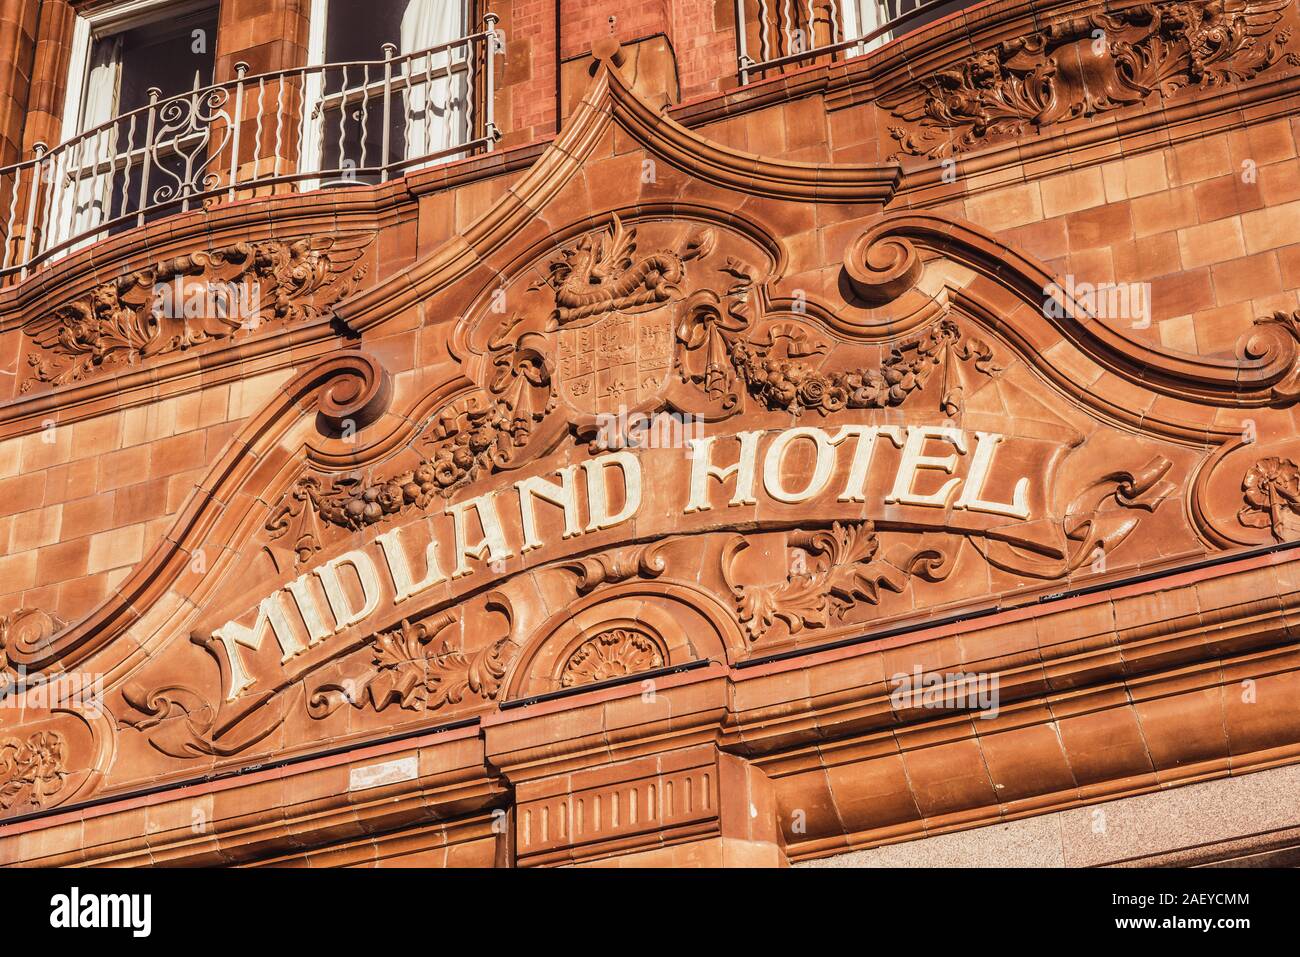 The Midland Hotel. Peter Street. Manchester. Stock Photo